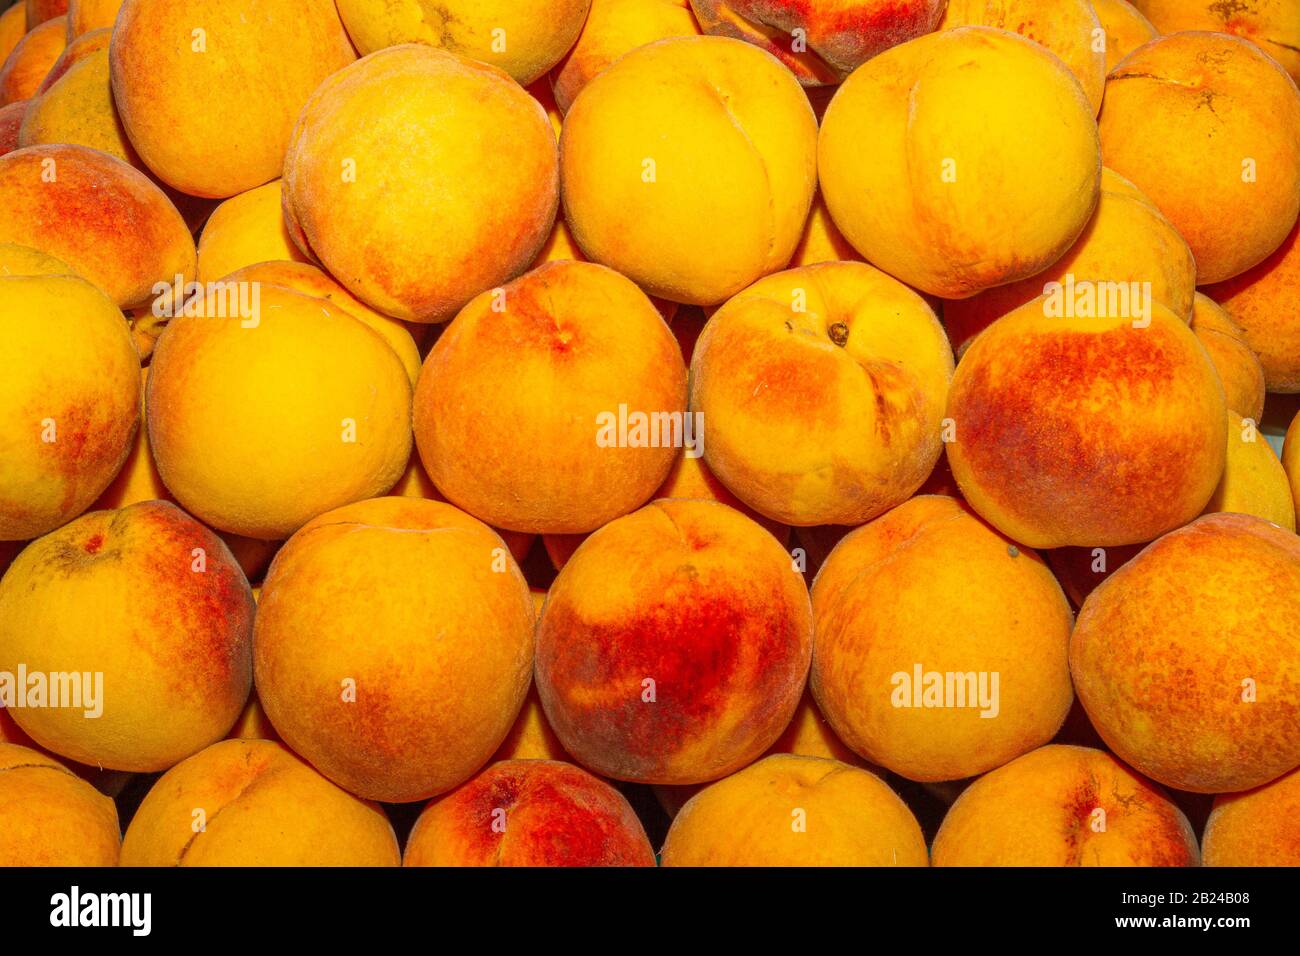 High energy antioxidant food, health booster juicy peaches super fruit on sale at local fruit market. Nutrition healthcare concept. Stock Photo